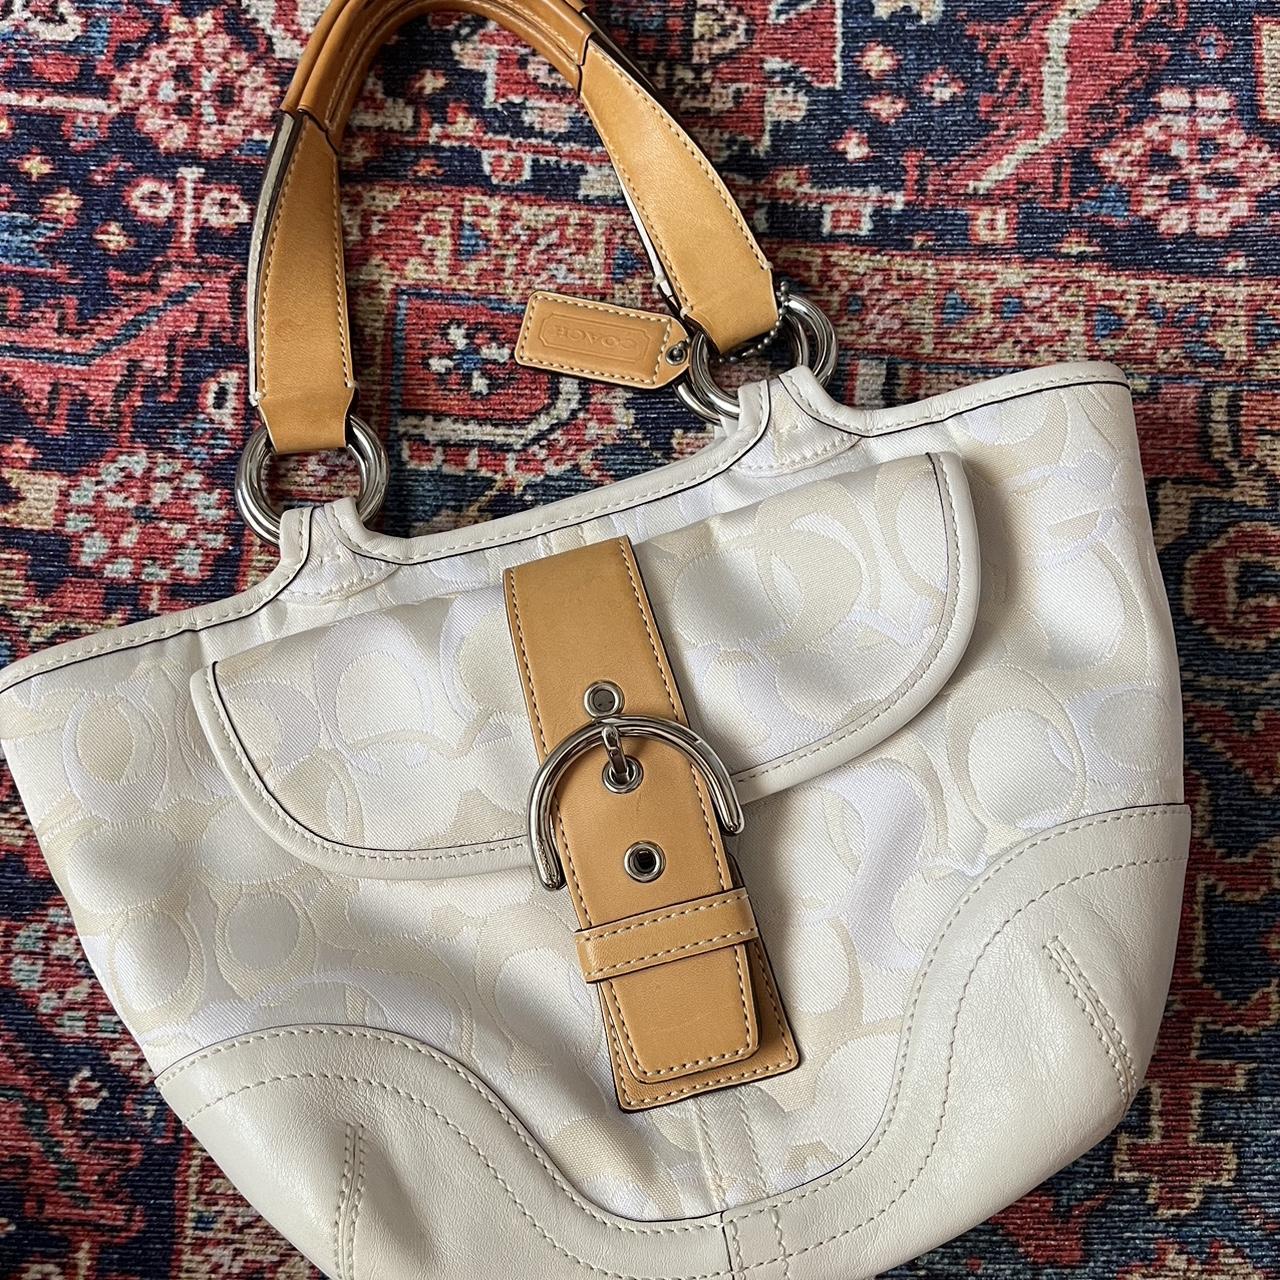 How to Buy Authentic Coach on eBay: 5 Basic Ways to Tell If a Coach Purse  Is Real or Fake - Bellatory